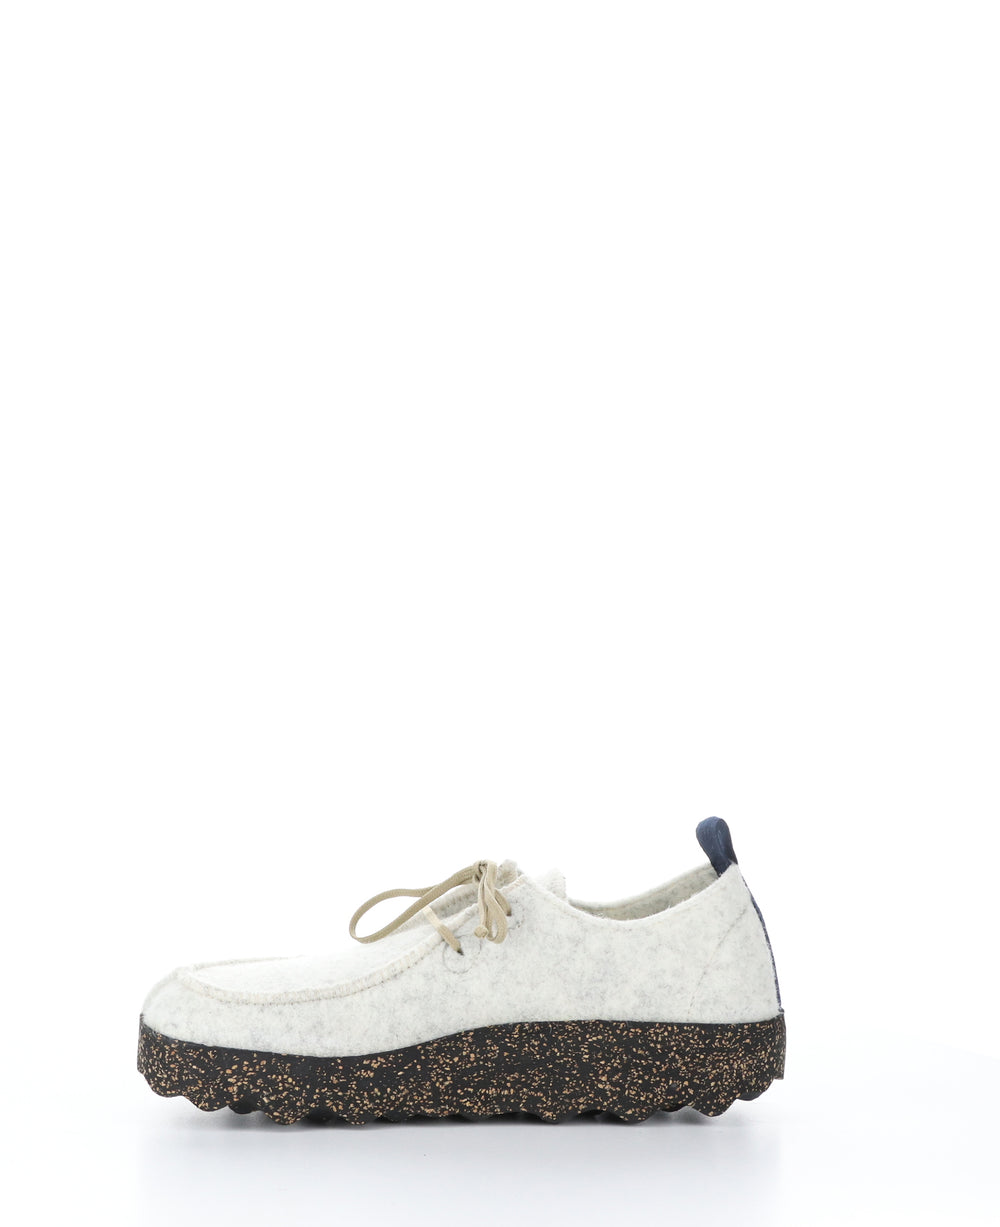 CHAT063ASP Off White Round Toe Shoes|CHAT063ASP Chaussures à Bout Rond in Blanc